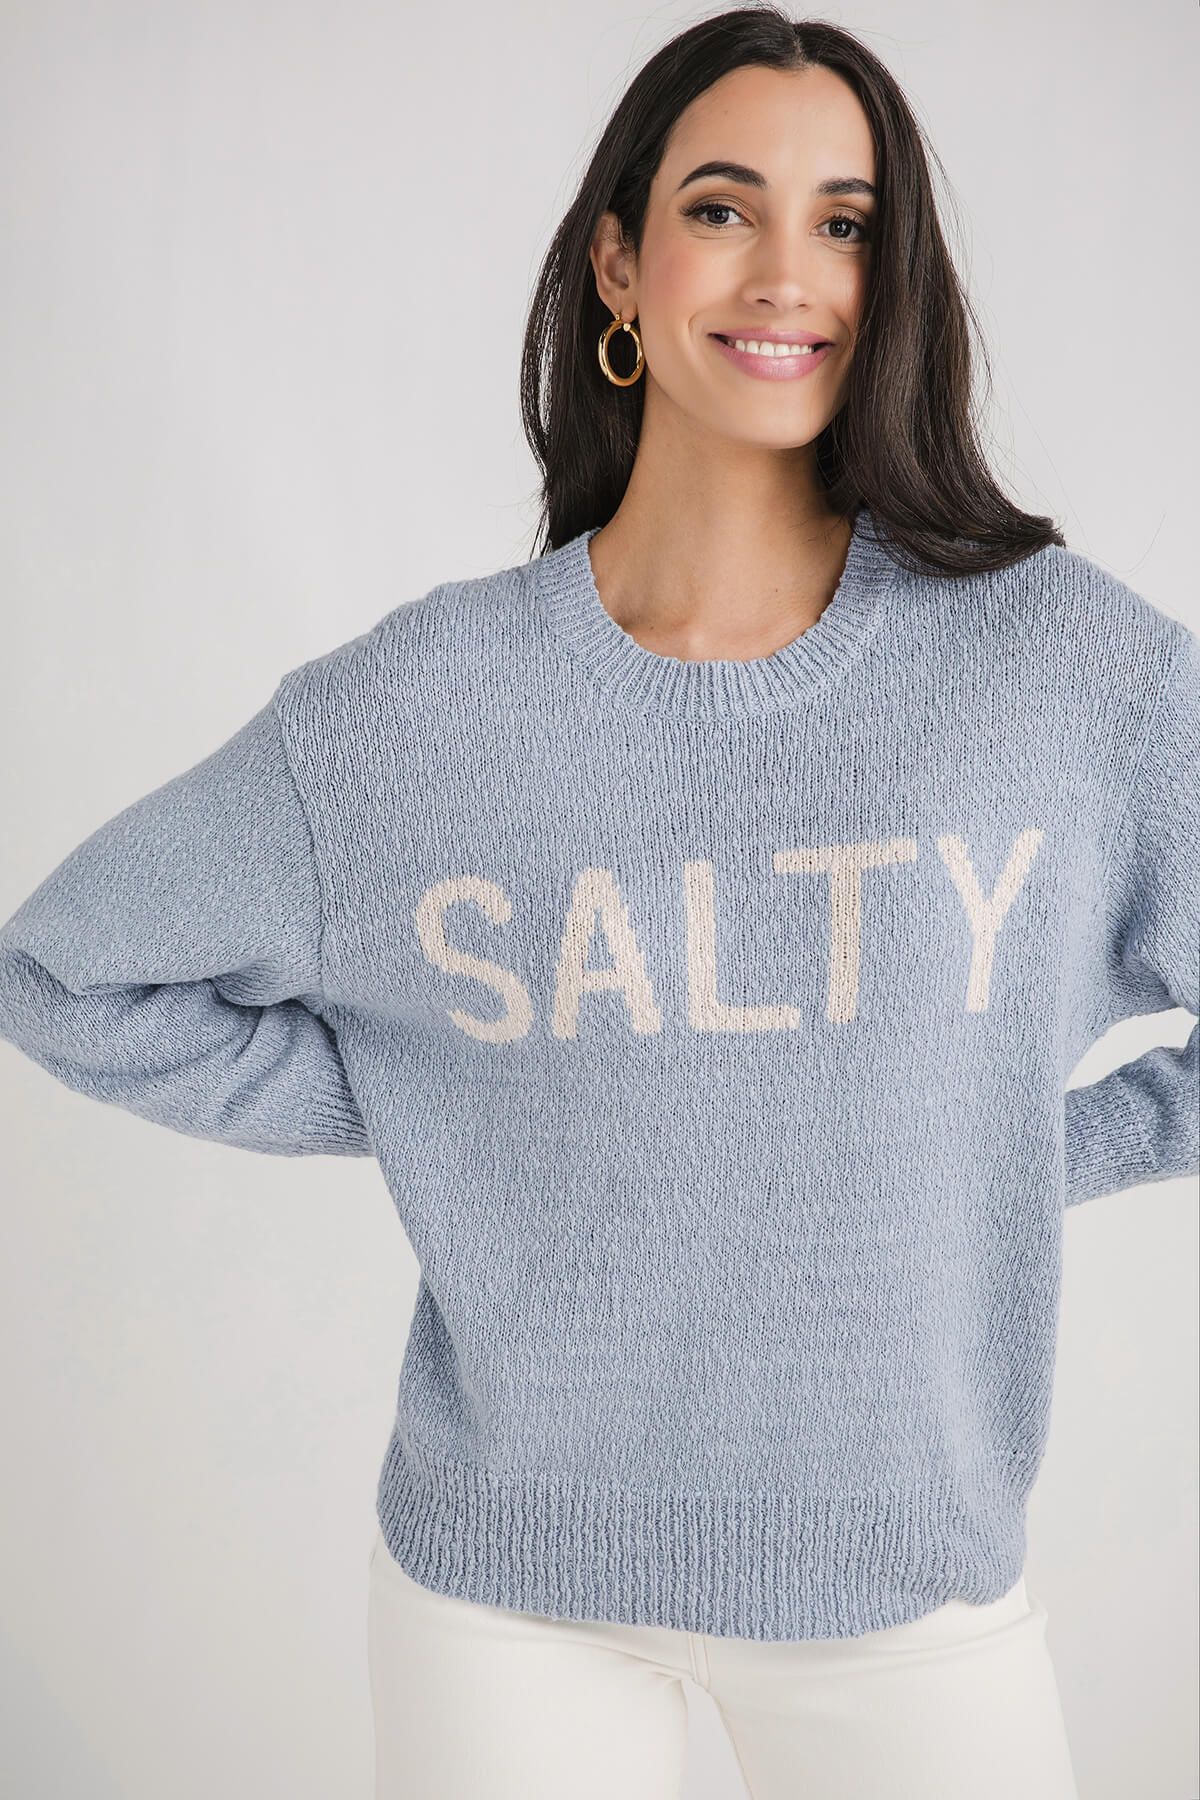 Z Supply Waves and Salty Sweater | Social Threads